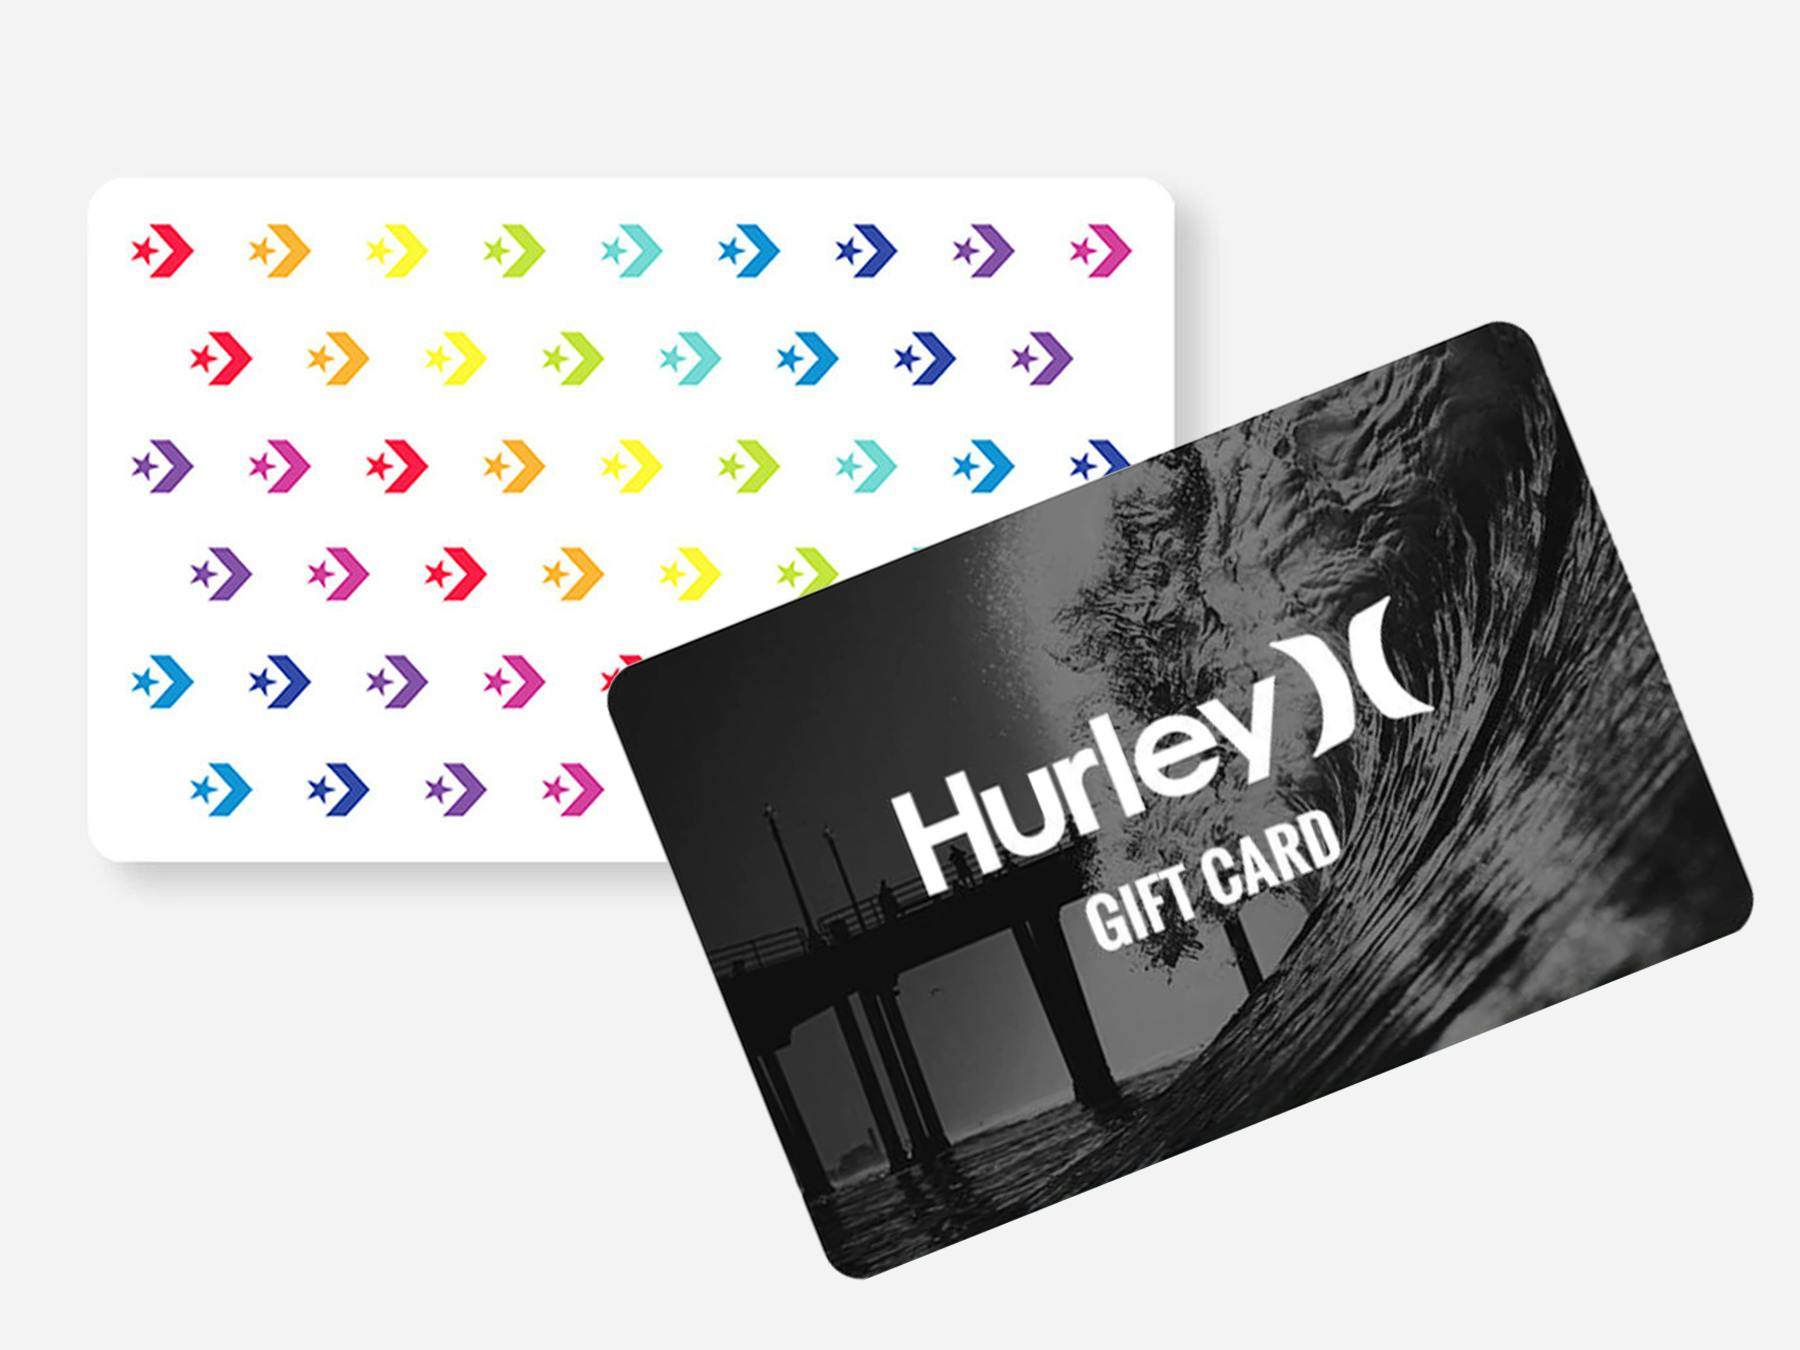 A graphic of Converse and Hurley gift cards.